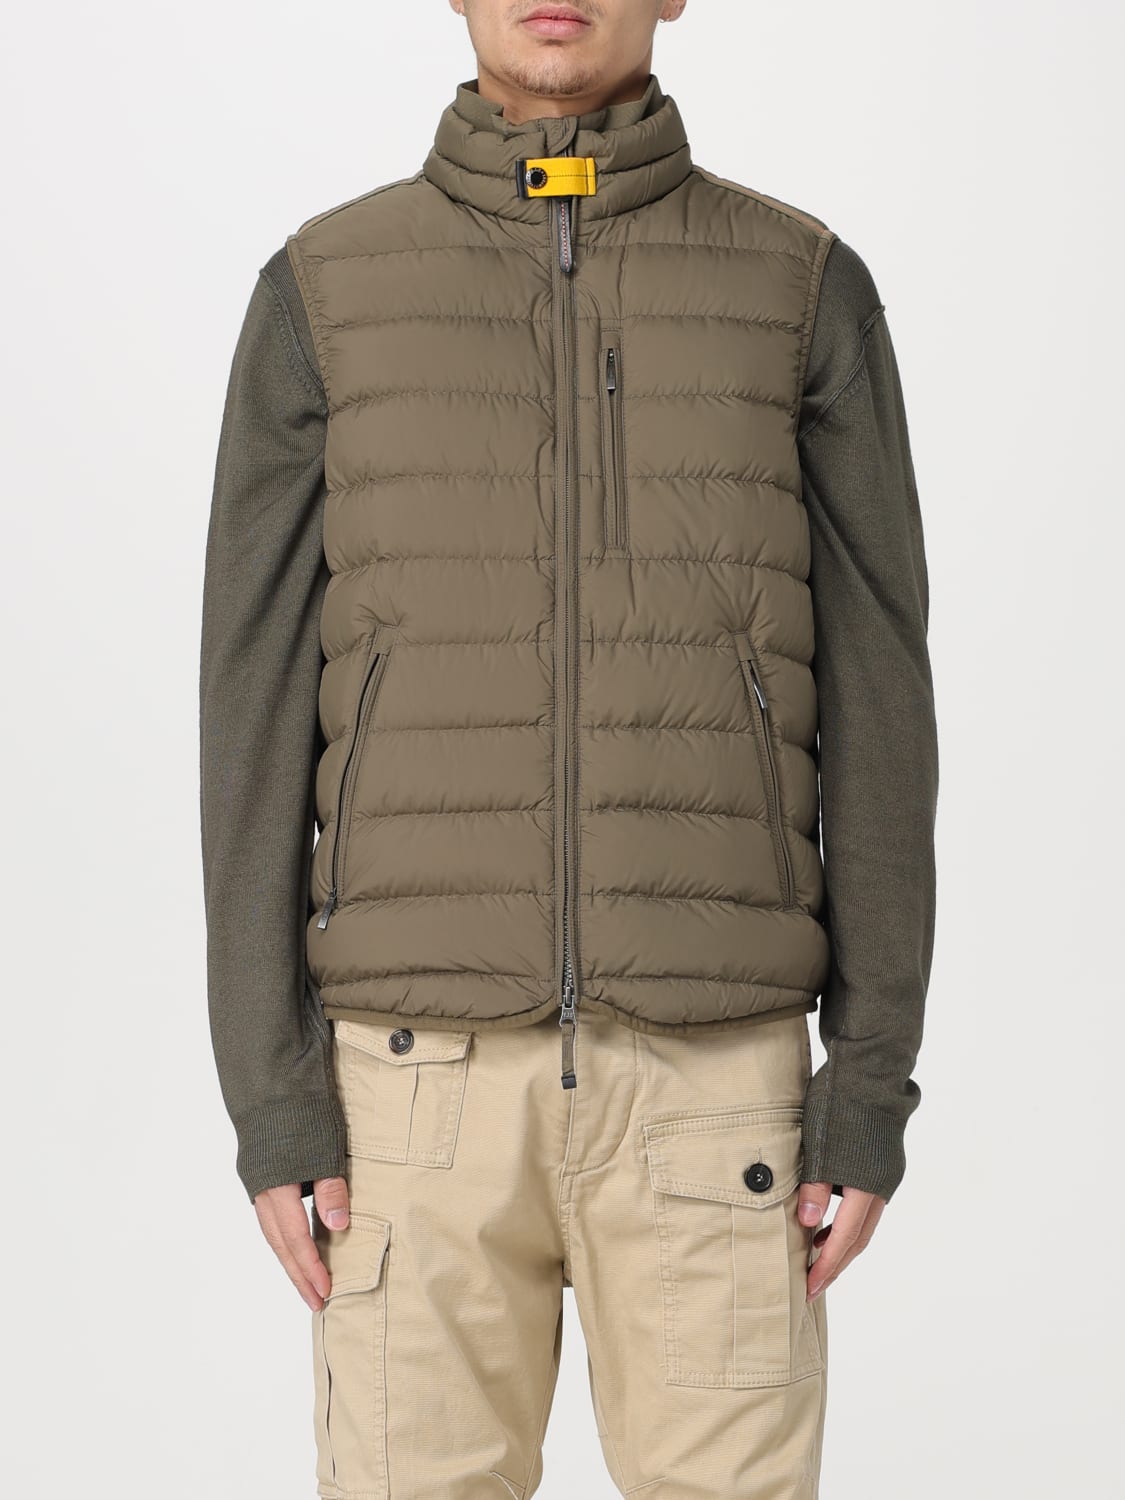 PARAJUMPERS: waistcoat for men - Olive | Parajumpers waistcoat PMPUSL01  online at GIGLIO.COM